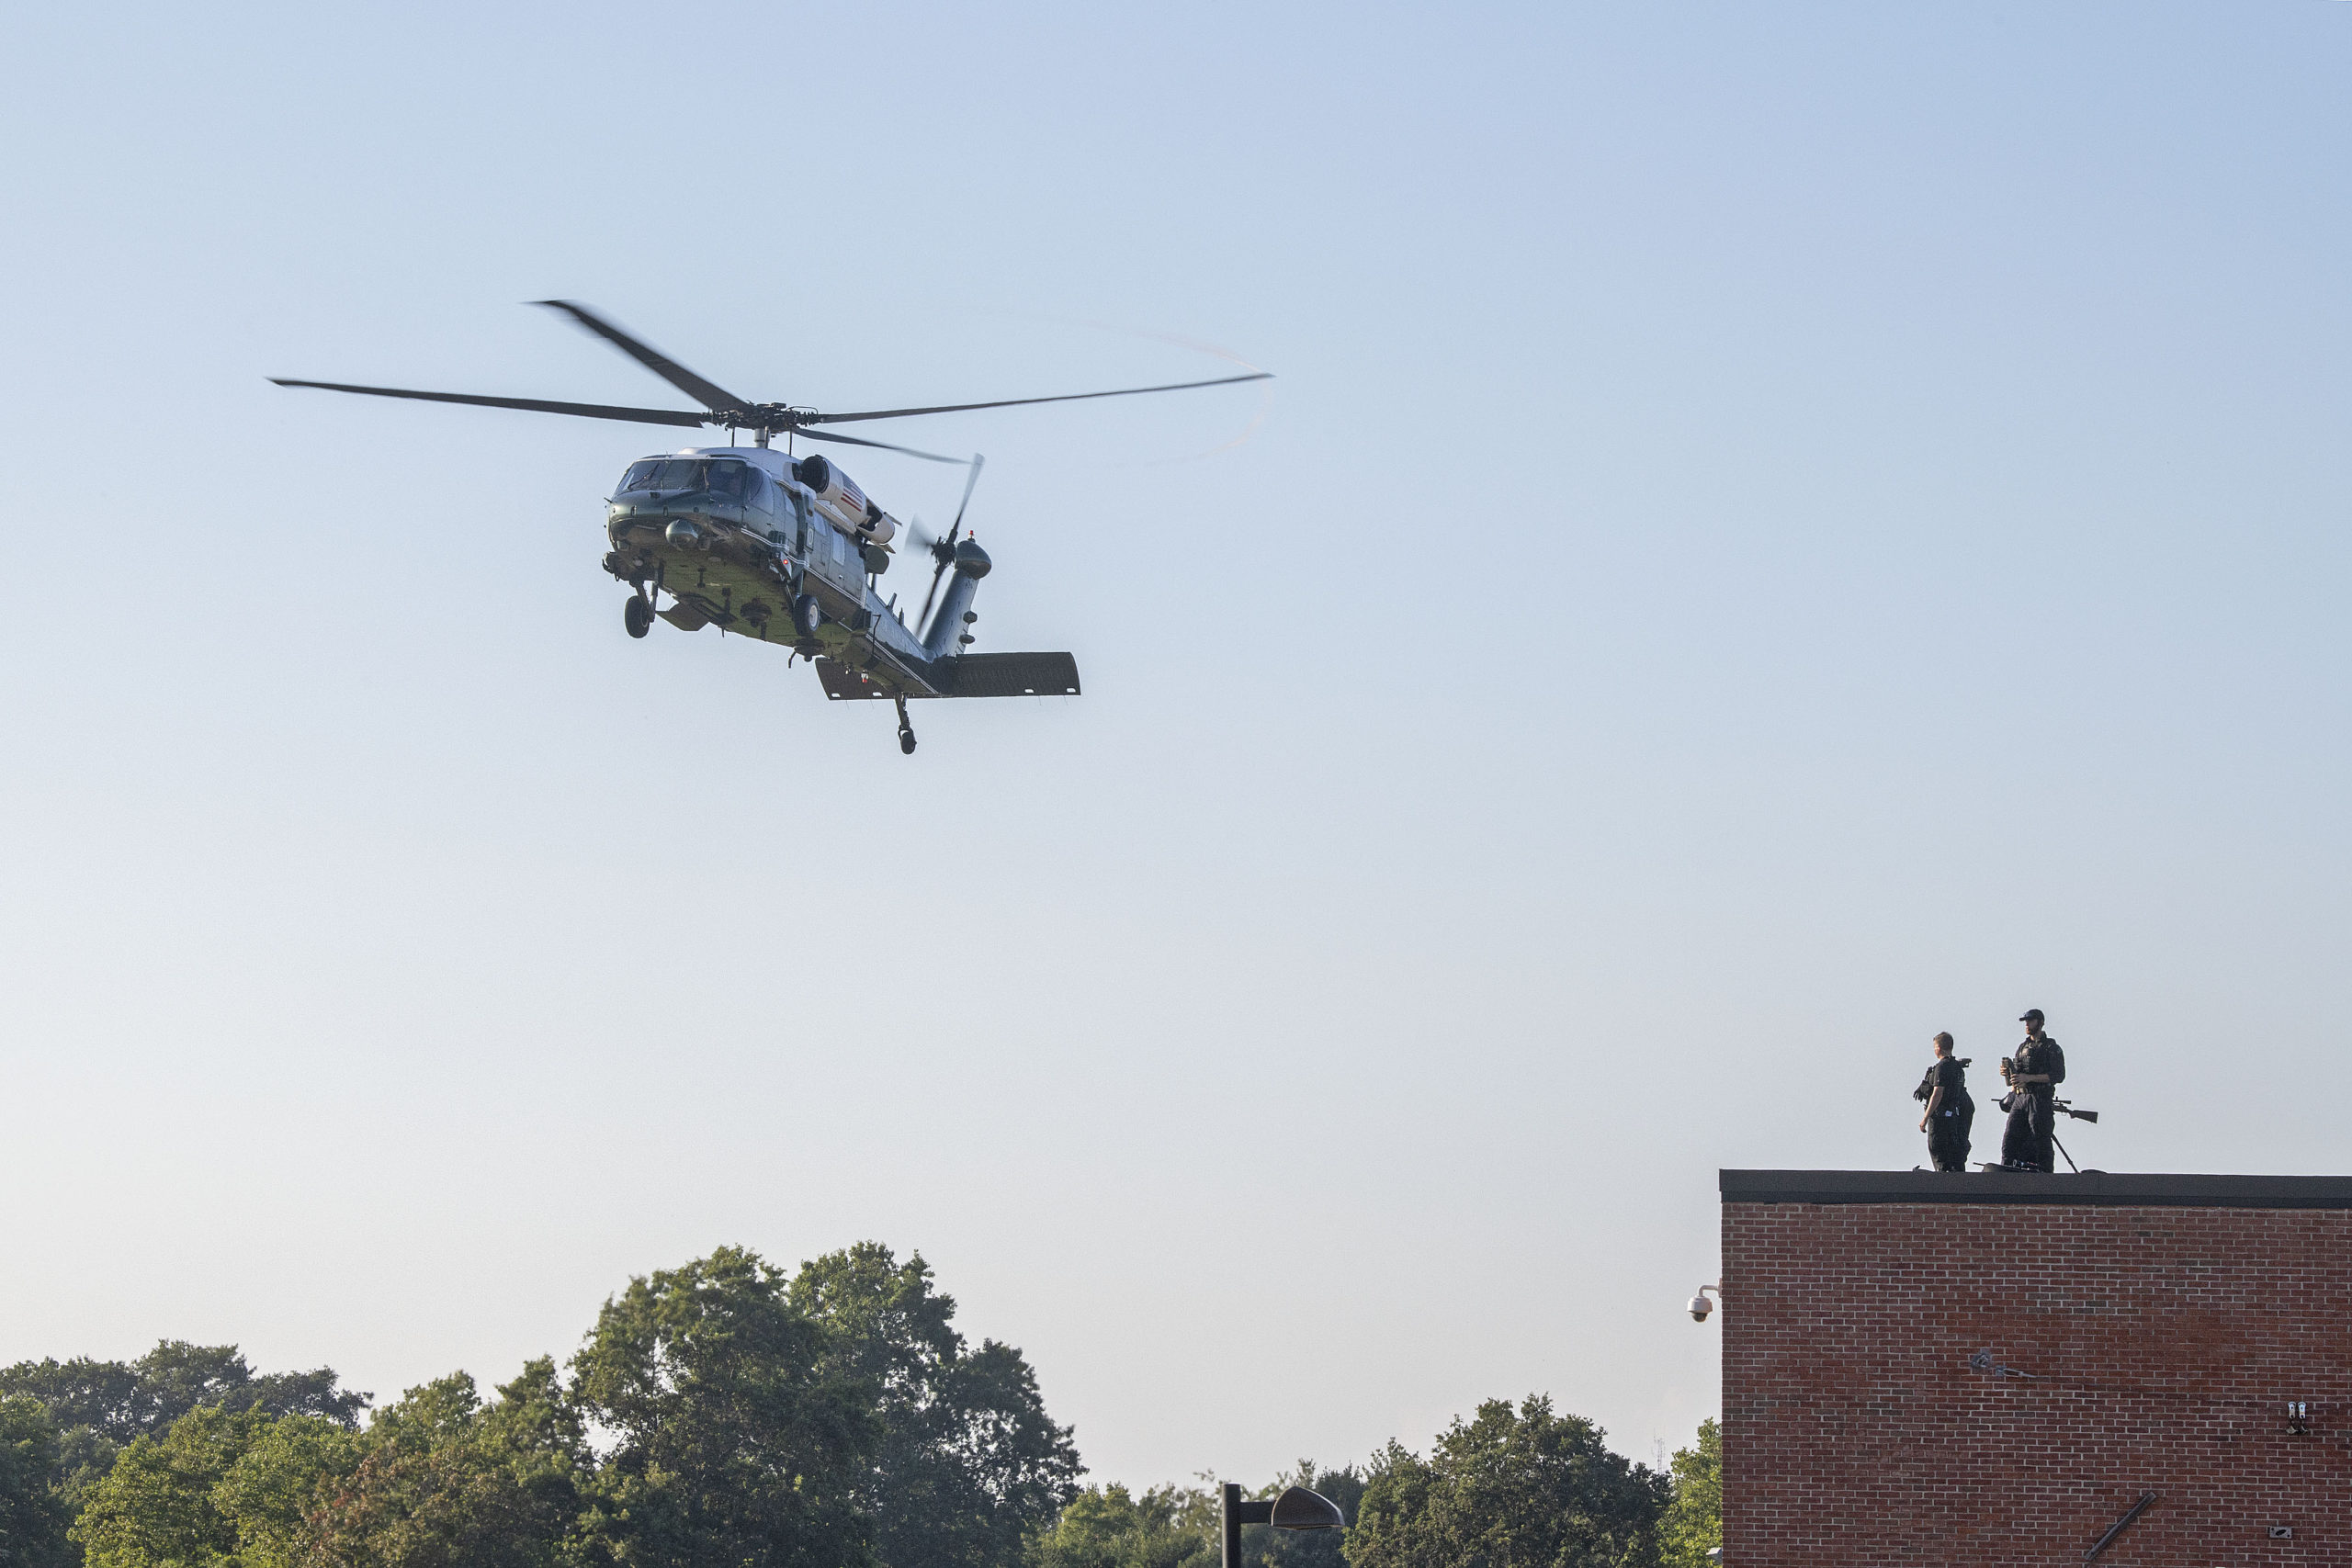 The president's helicopter, Marine One, and its escorts landed at Southampton High School on Saturday afternoon under heavy security. 